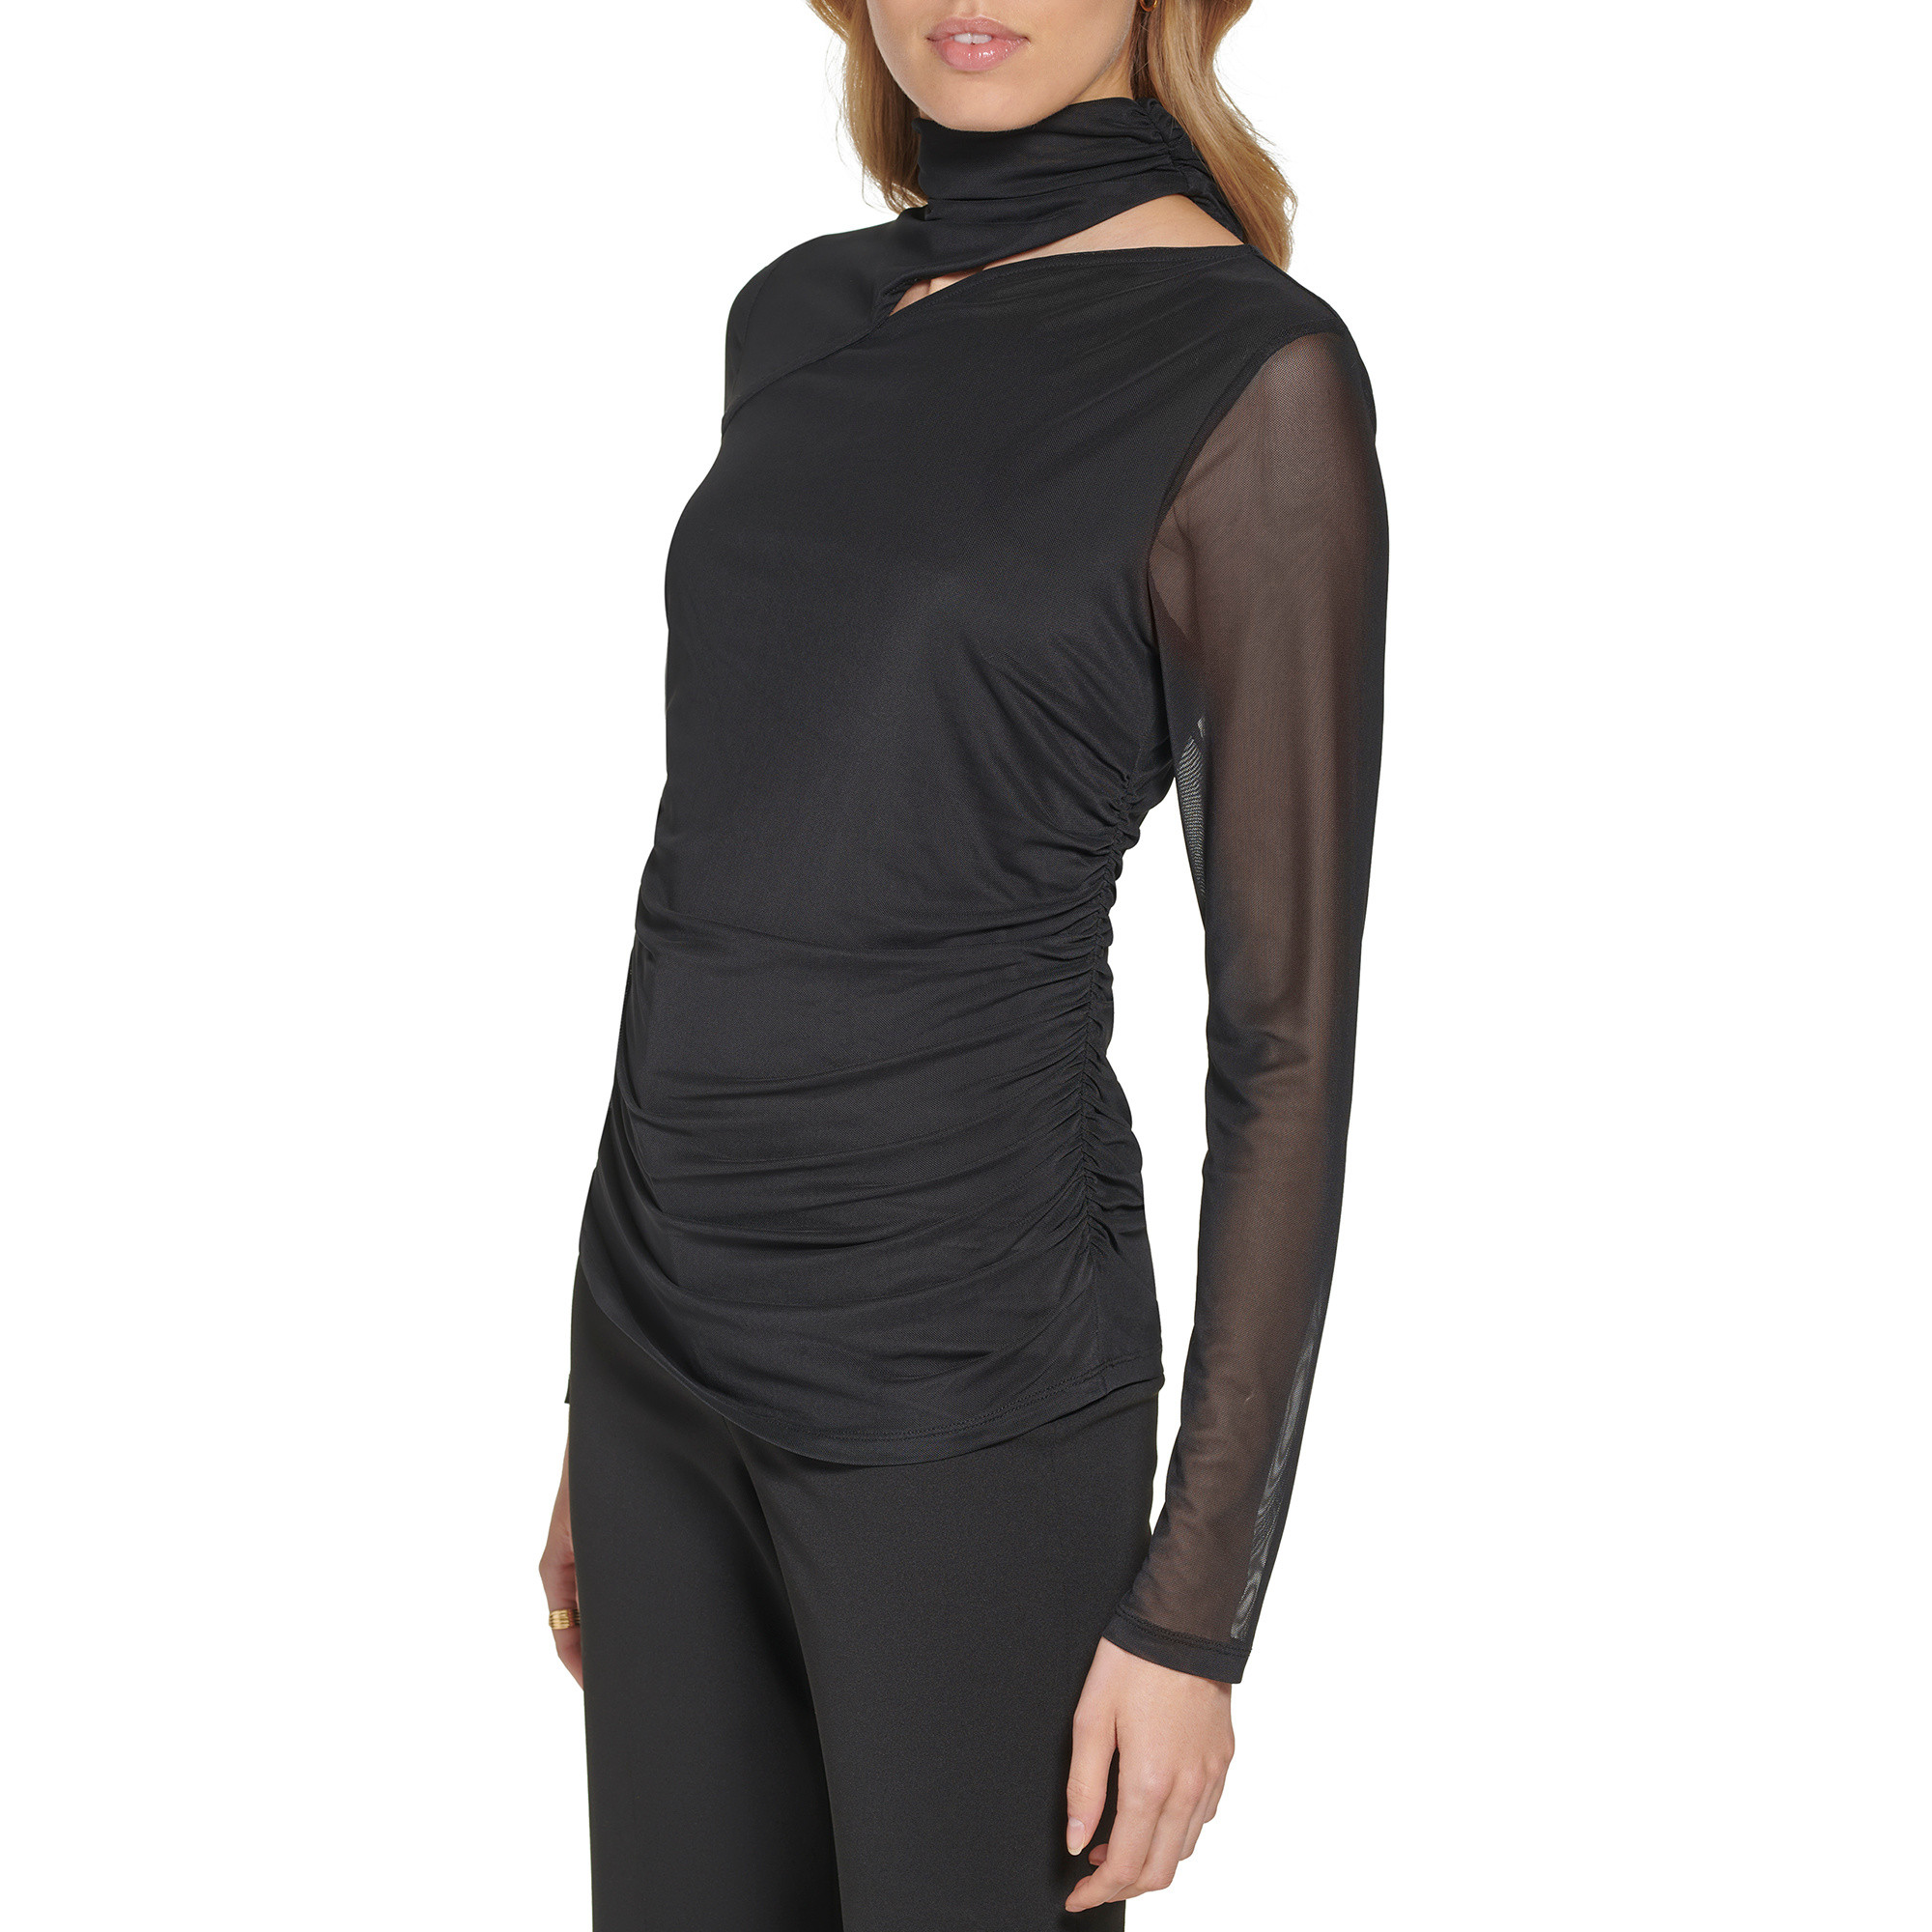 DKNY - Mesh sweater with cut out detail, Black, large image number 3